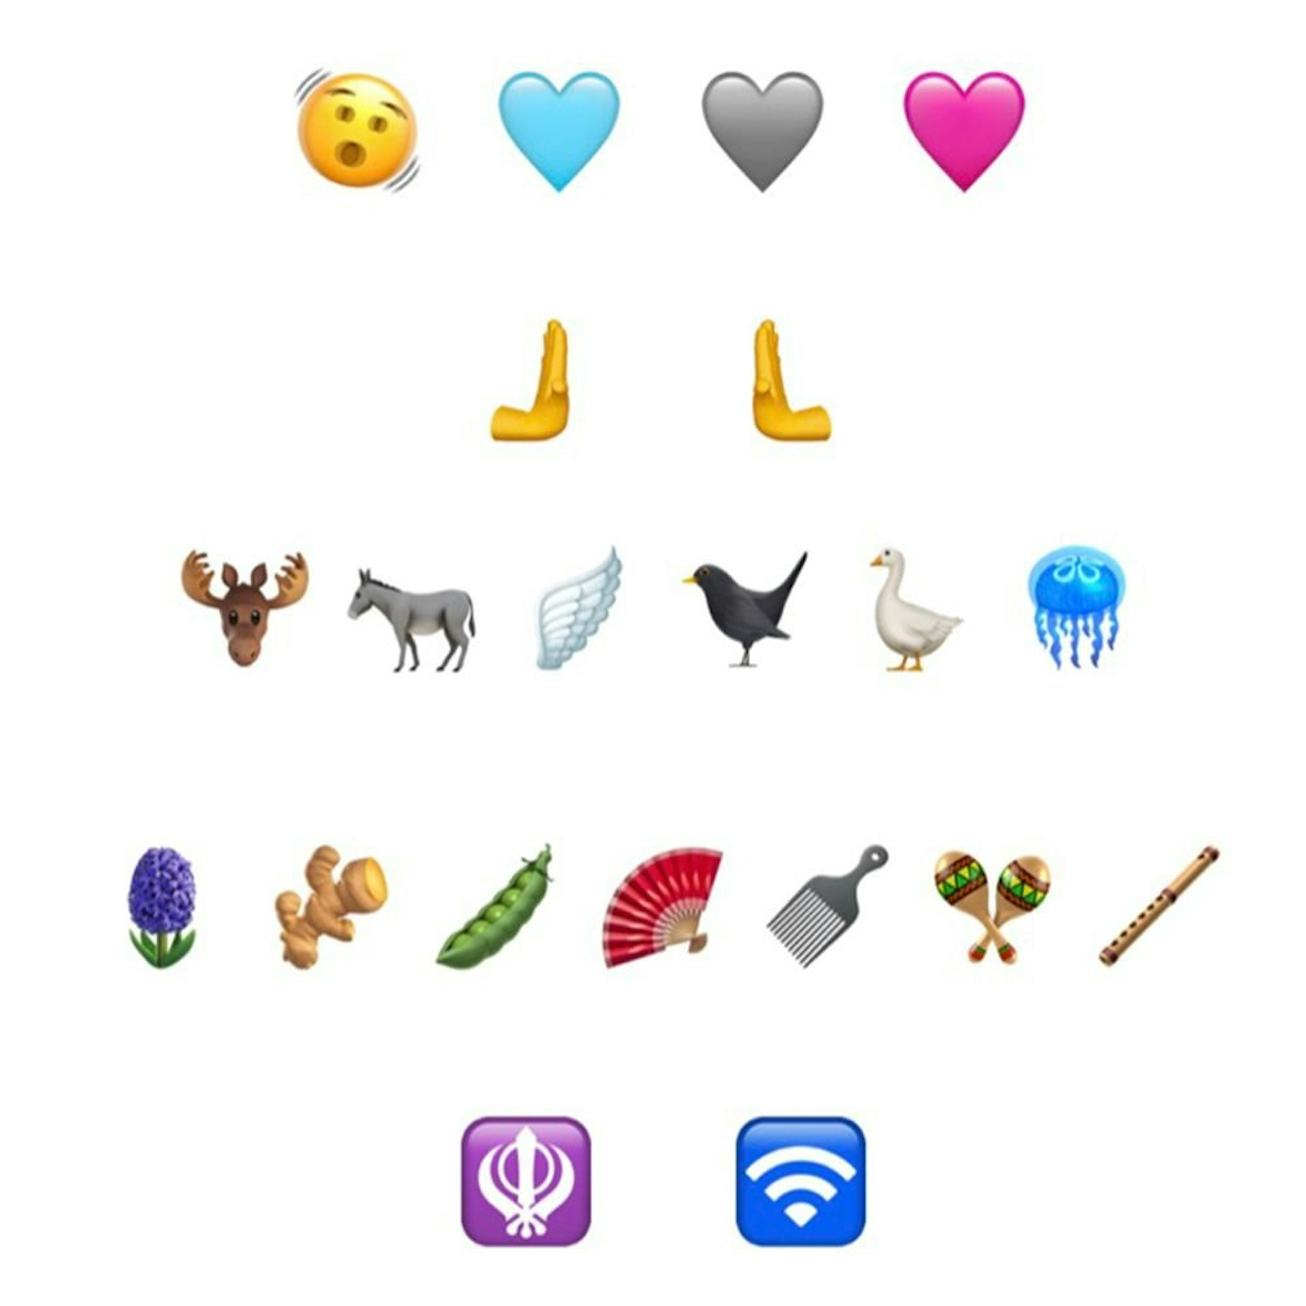 Tell Your Friends To “Talk To The Hand” With The New Emoji Set